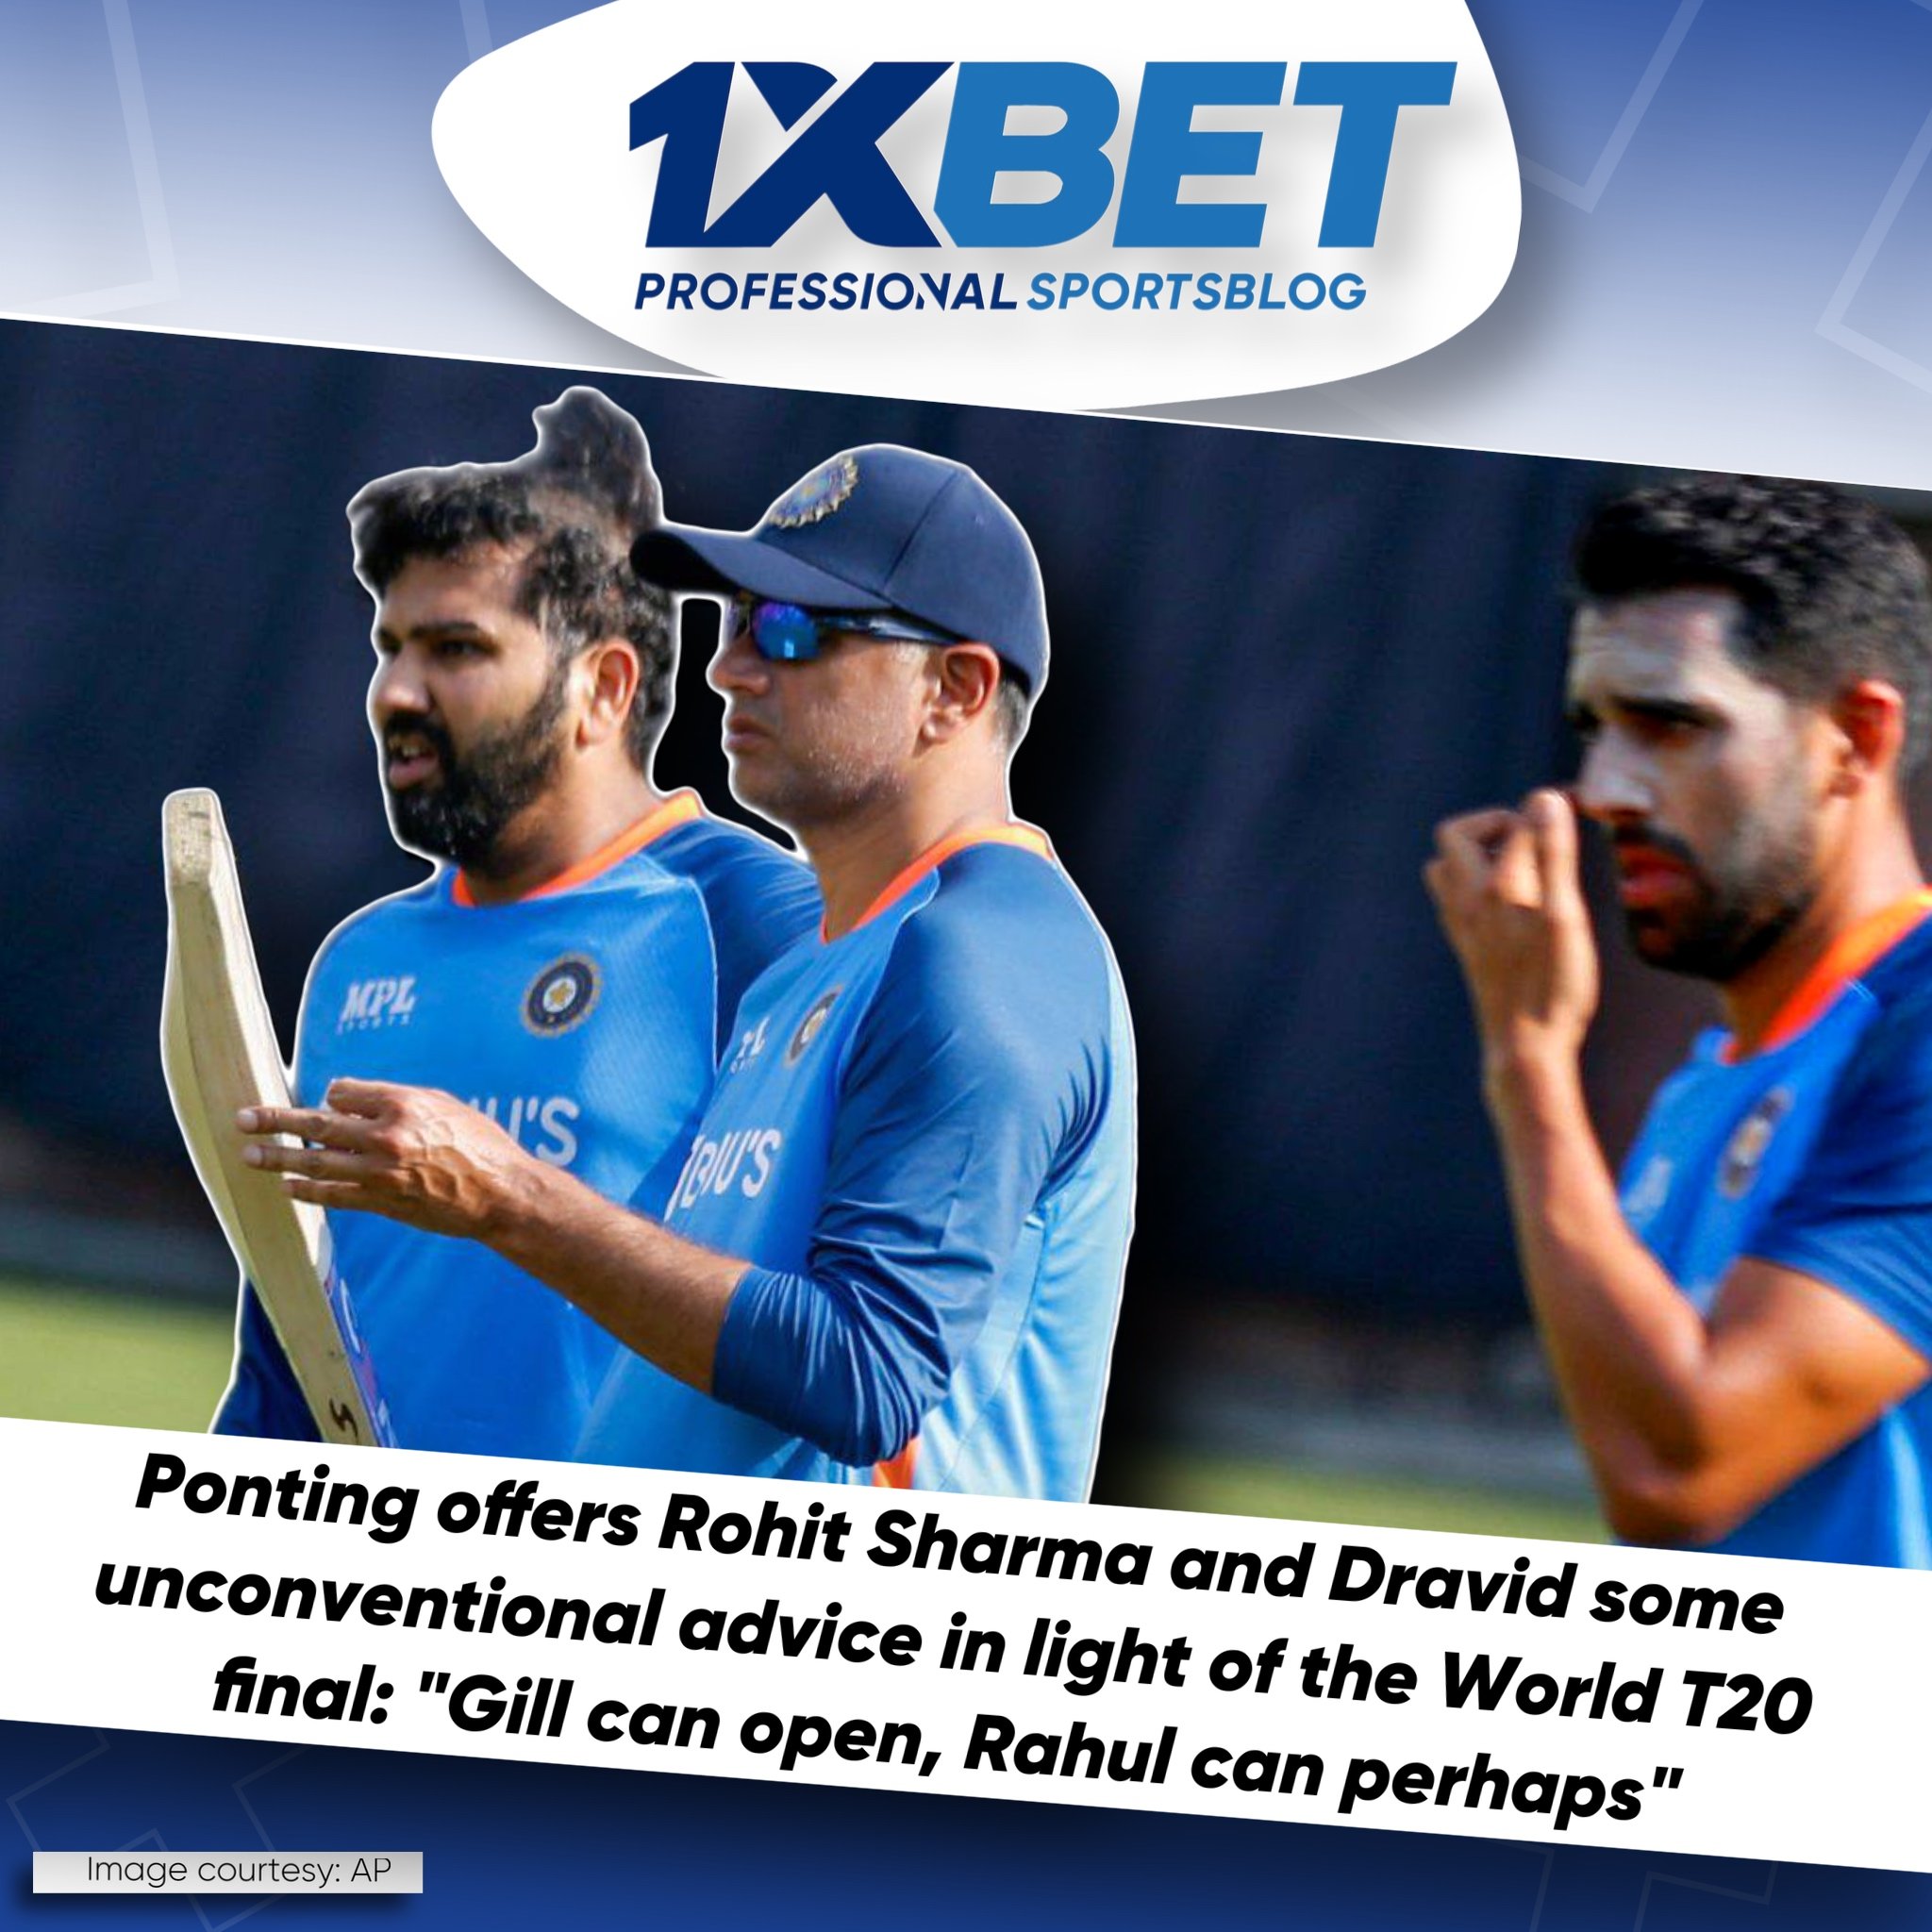 Ponting offers Rohit Sharma and Dravid some unconventional advice in light of the World T20 final: "Gill can open, Rahul can perhaps"